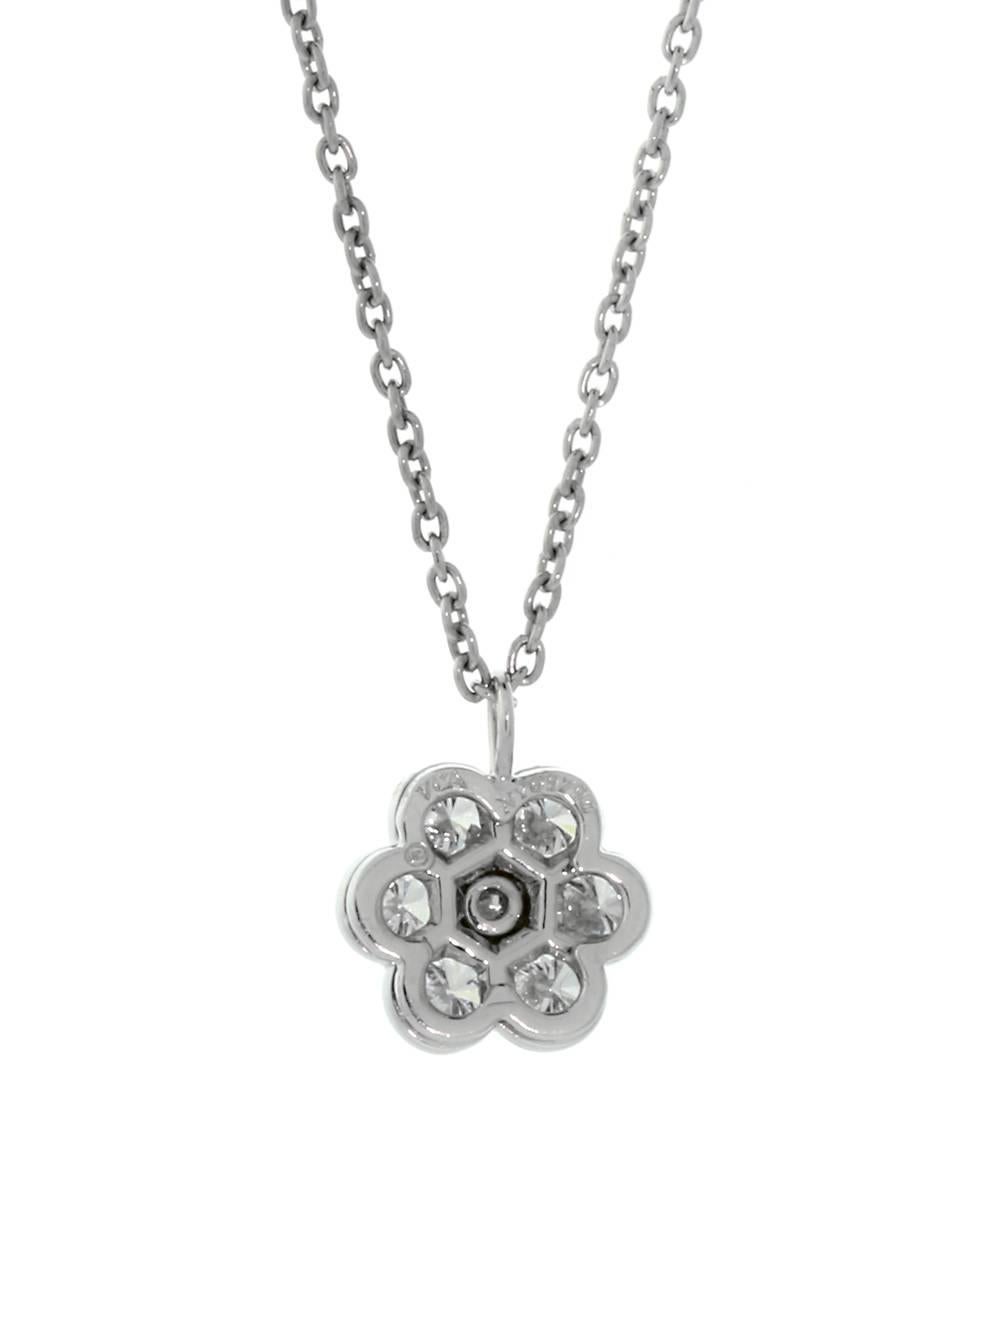 Van Cleef & Arpels Diamond Flower Necklace will let you exhibit your whimsical side. With an 18-inch chain, the necklace flatters your neckline since it drapes to the middle of your chest. Because of the jewelry item’s subtle inclusion of seven